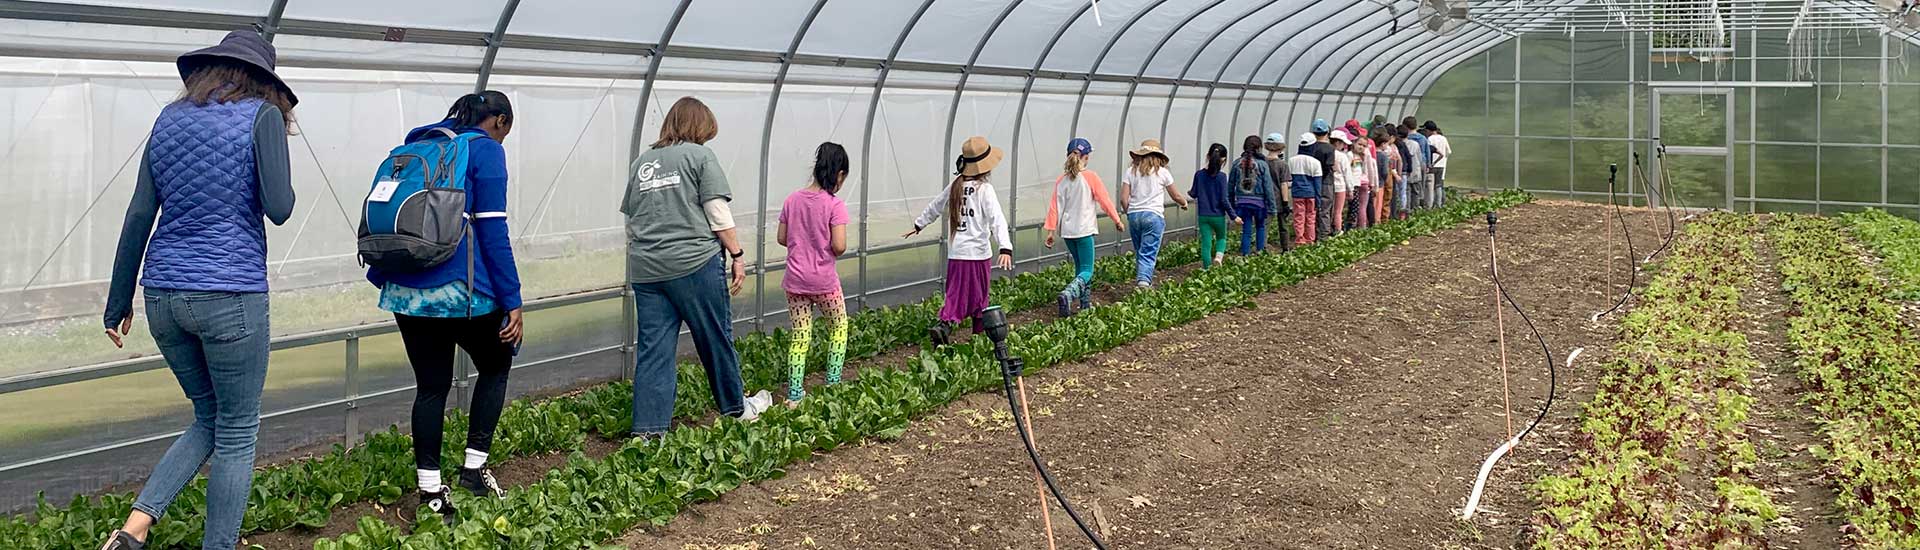 Second graders walk single-file from a greenhouse at Gaining Ground